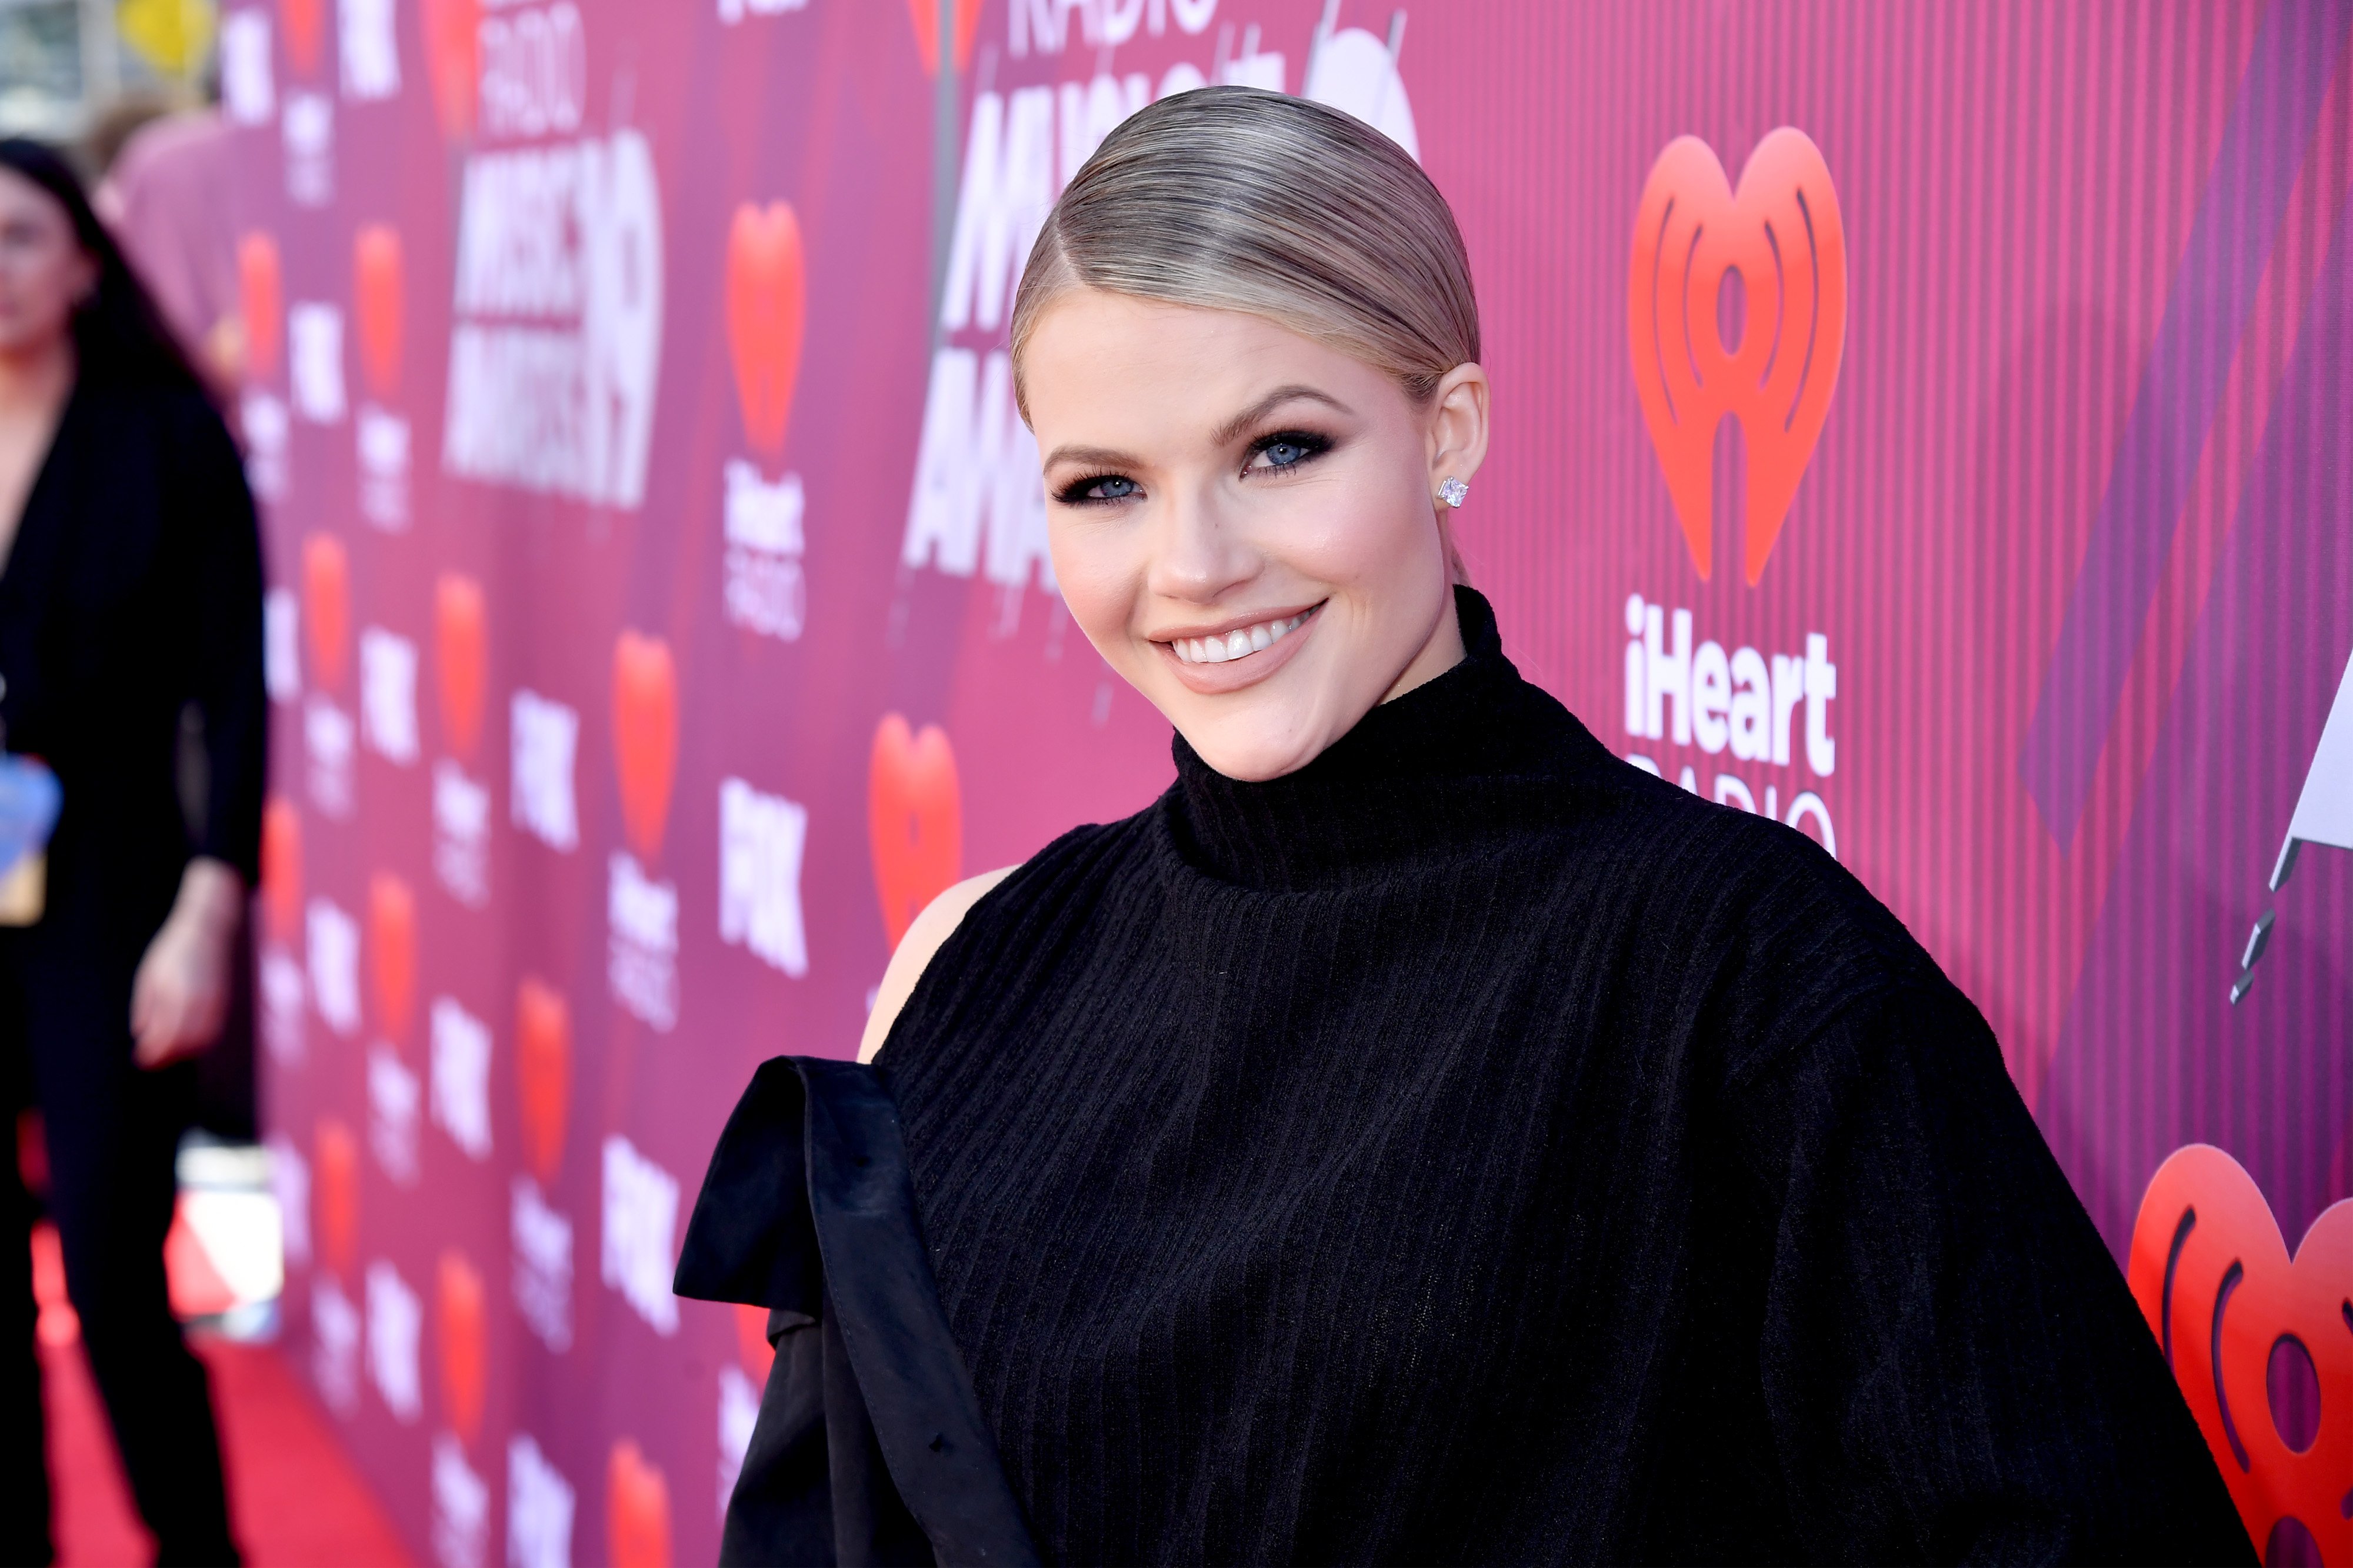 The "DWTS" dancer Witney Carson. | Photo: Getty Images